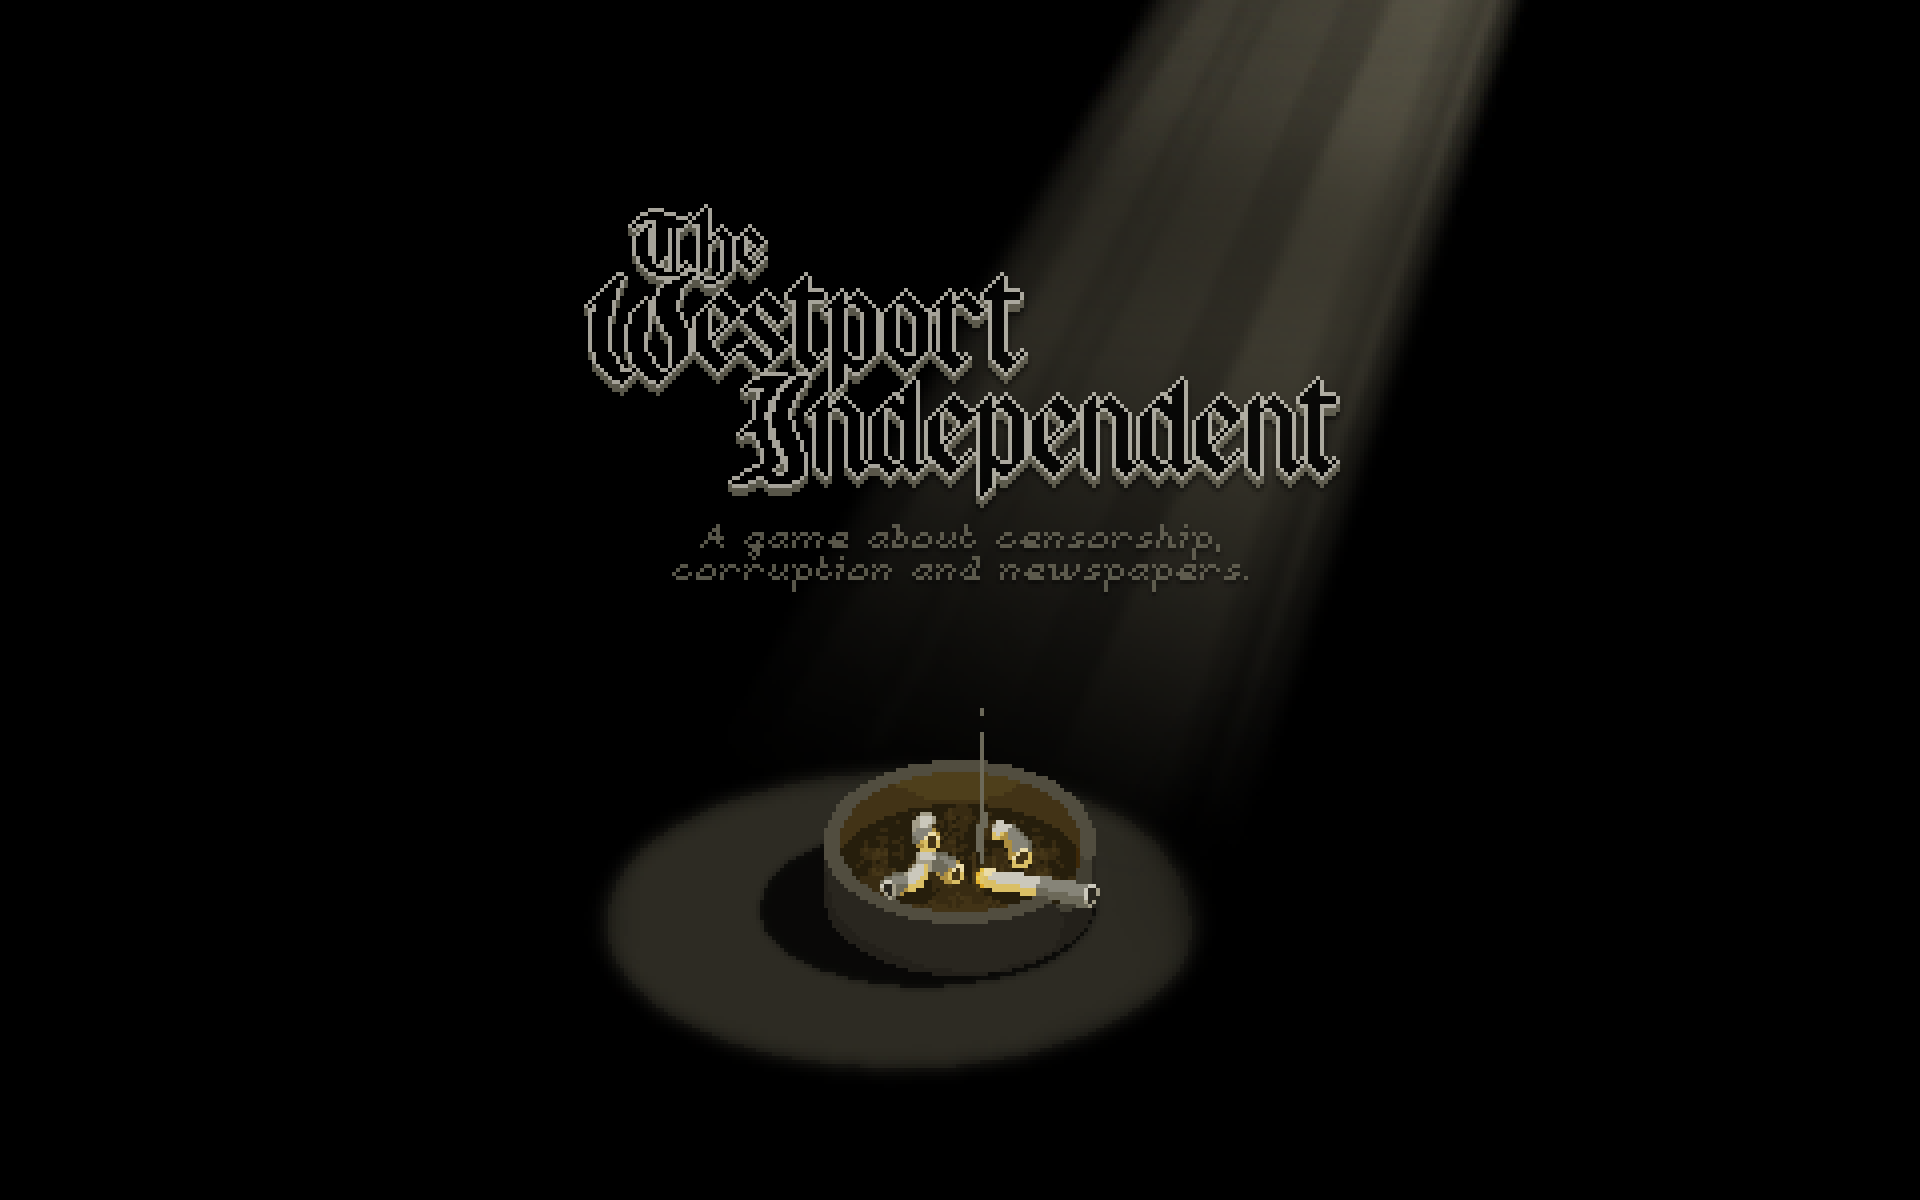 Android application The Westport Independent screenshort